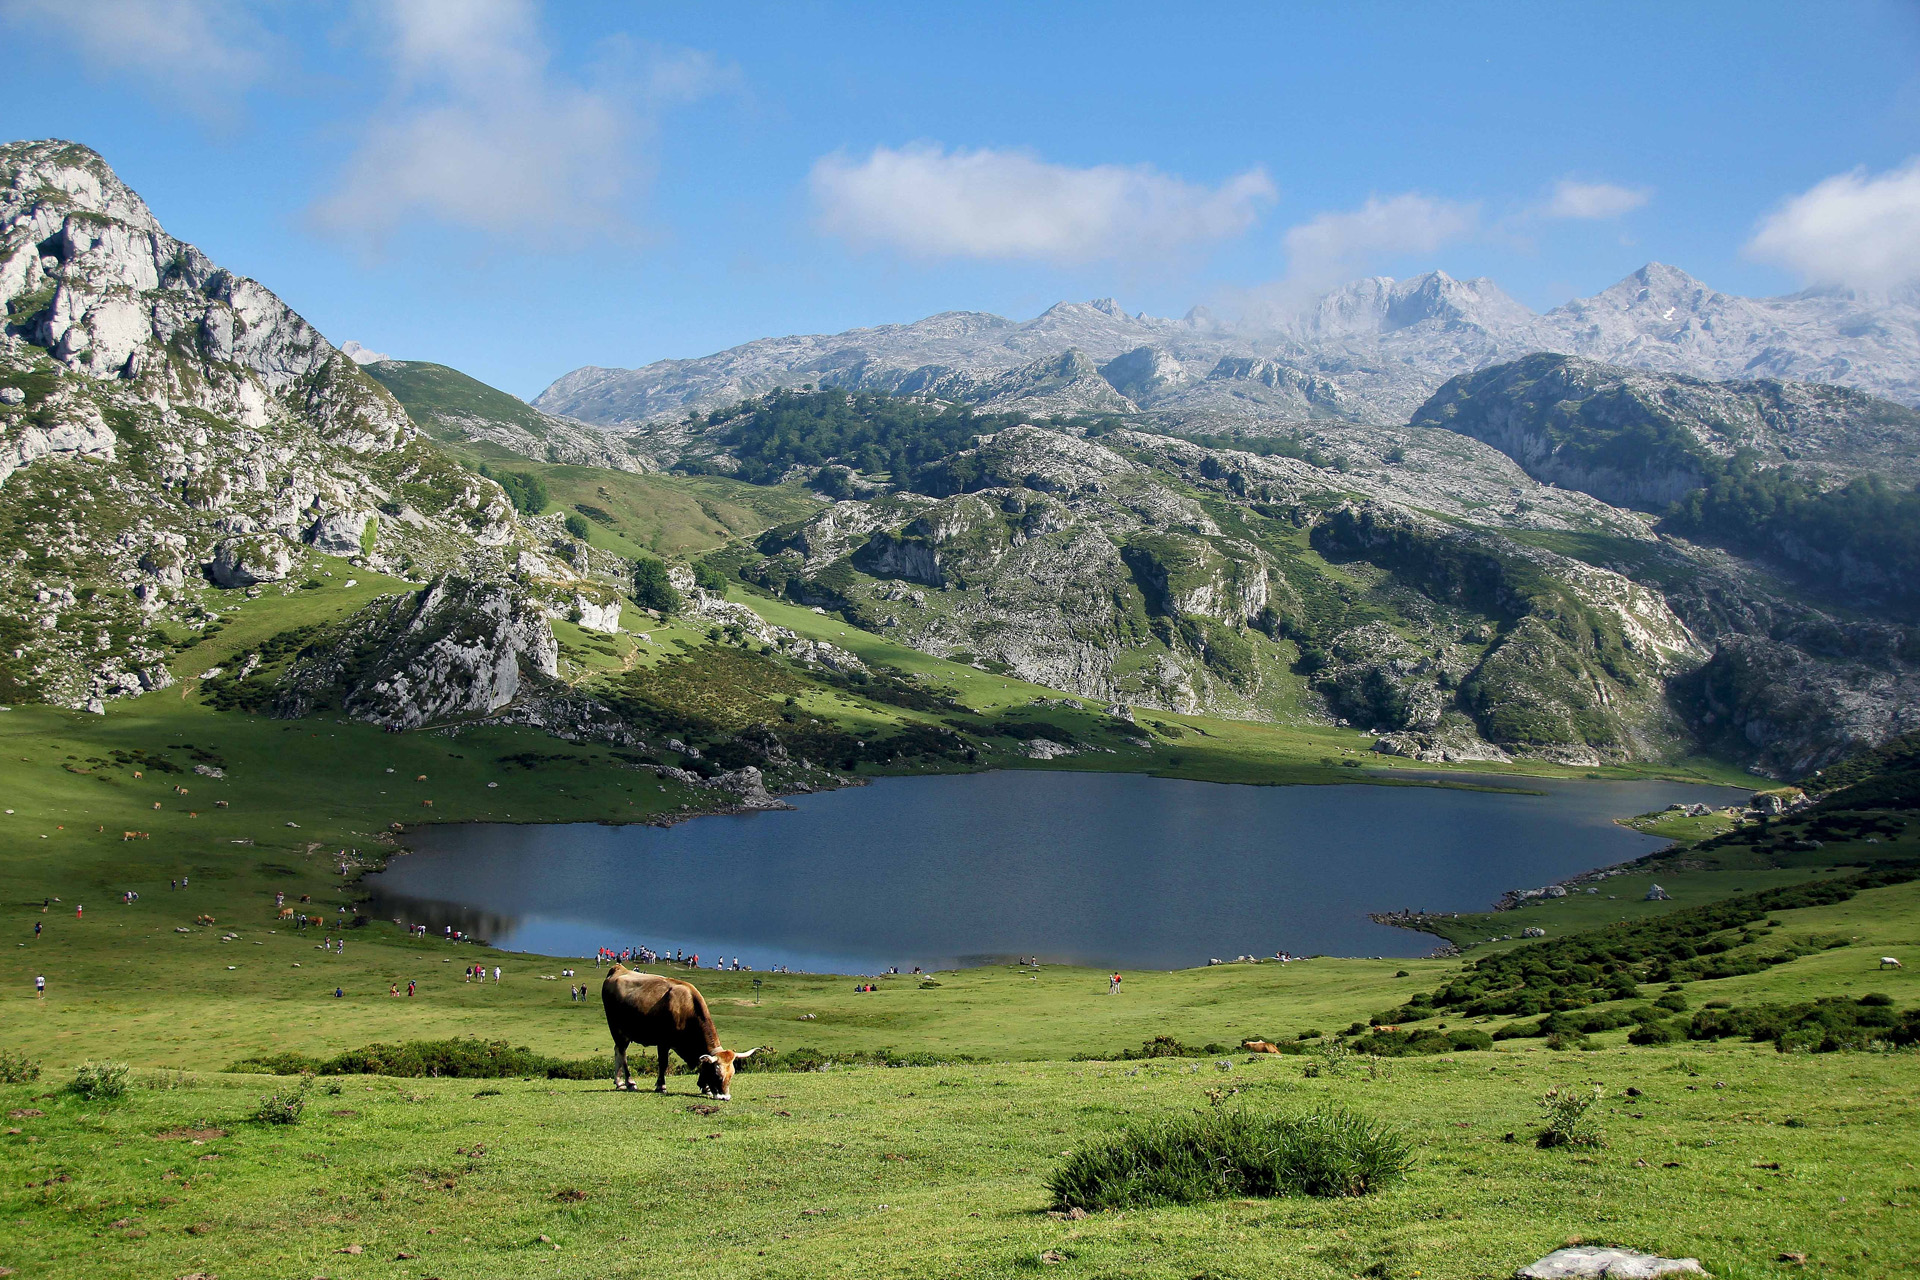 A natural scene in Europe with a cow in the foreground